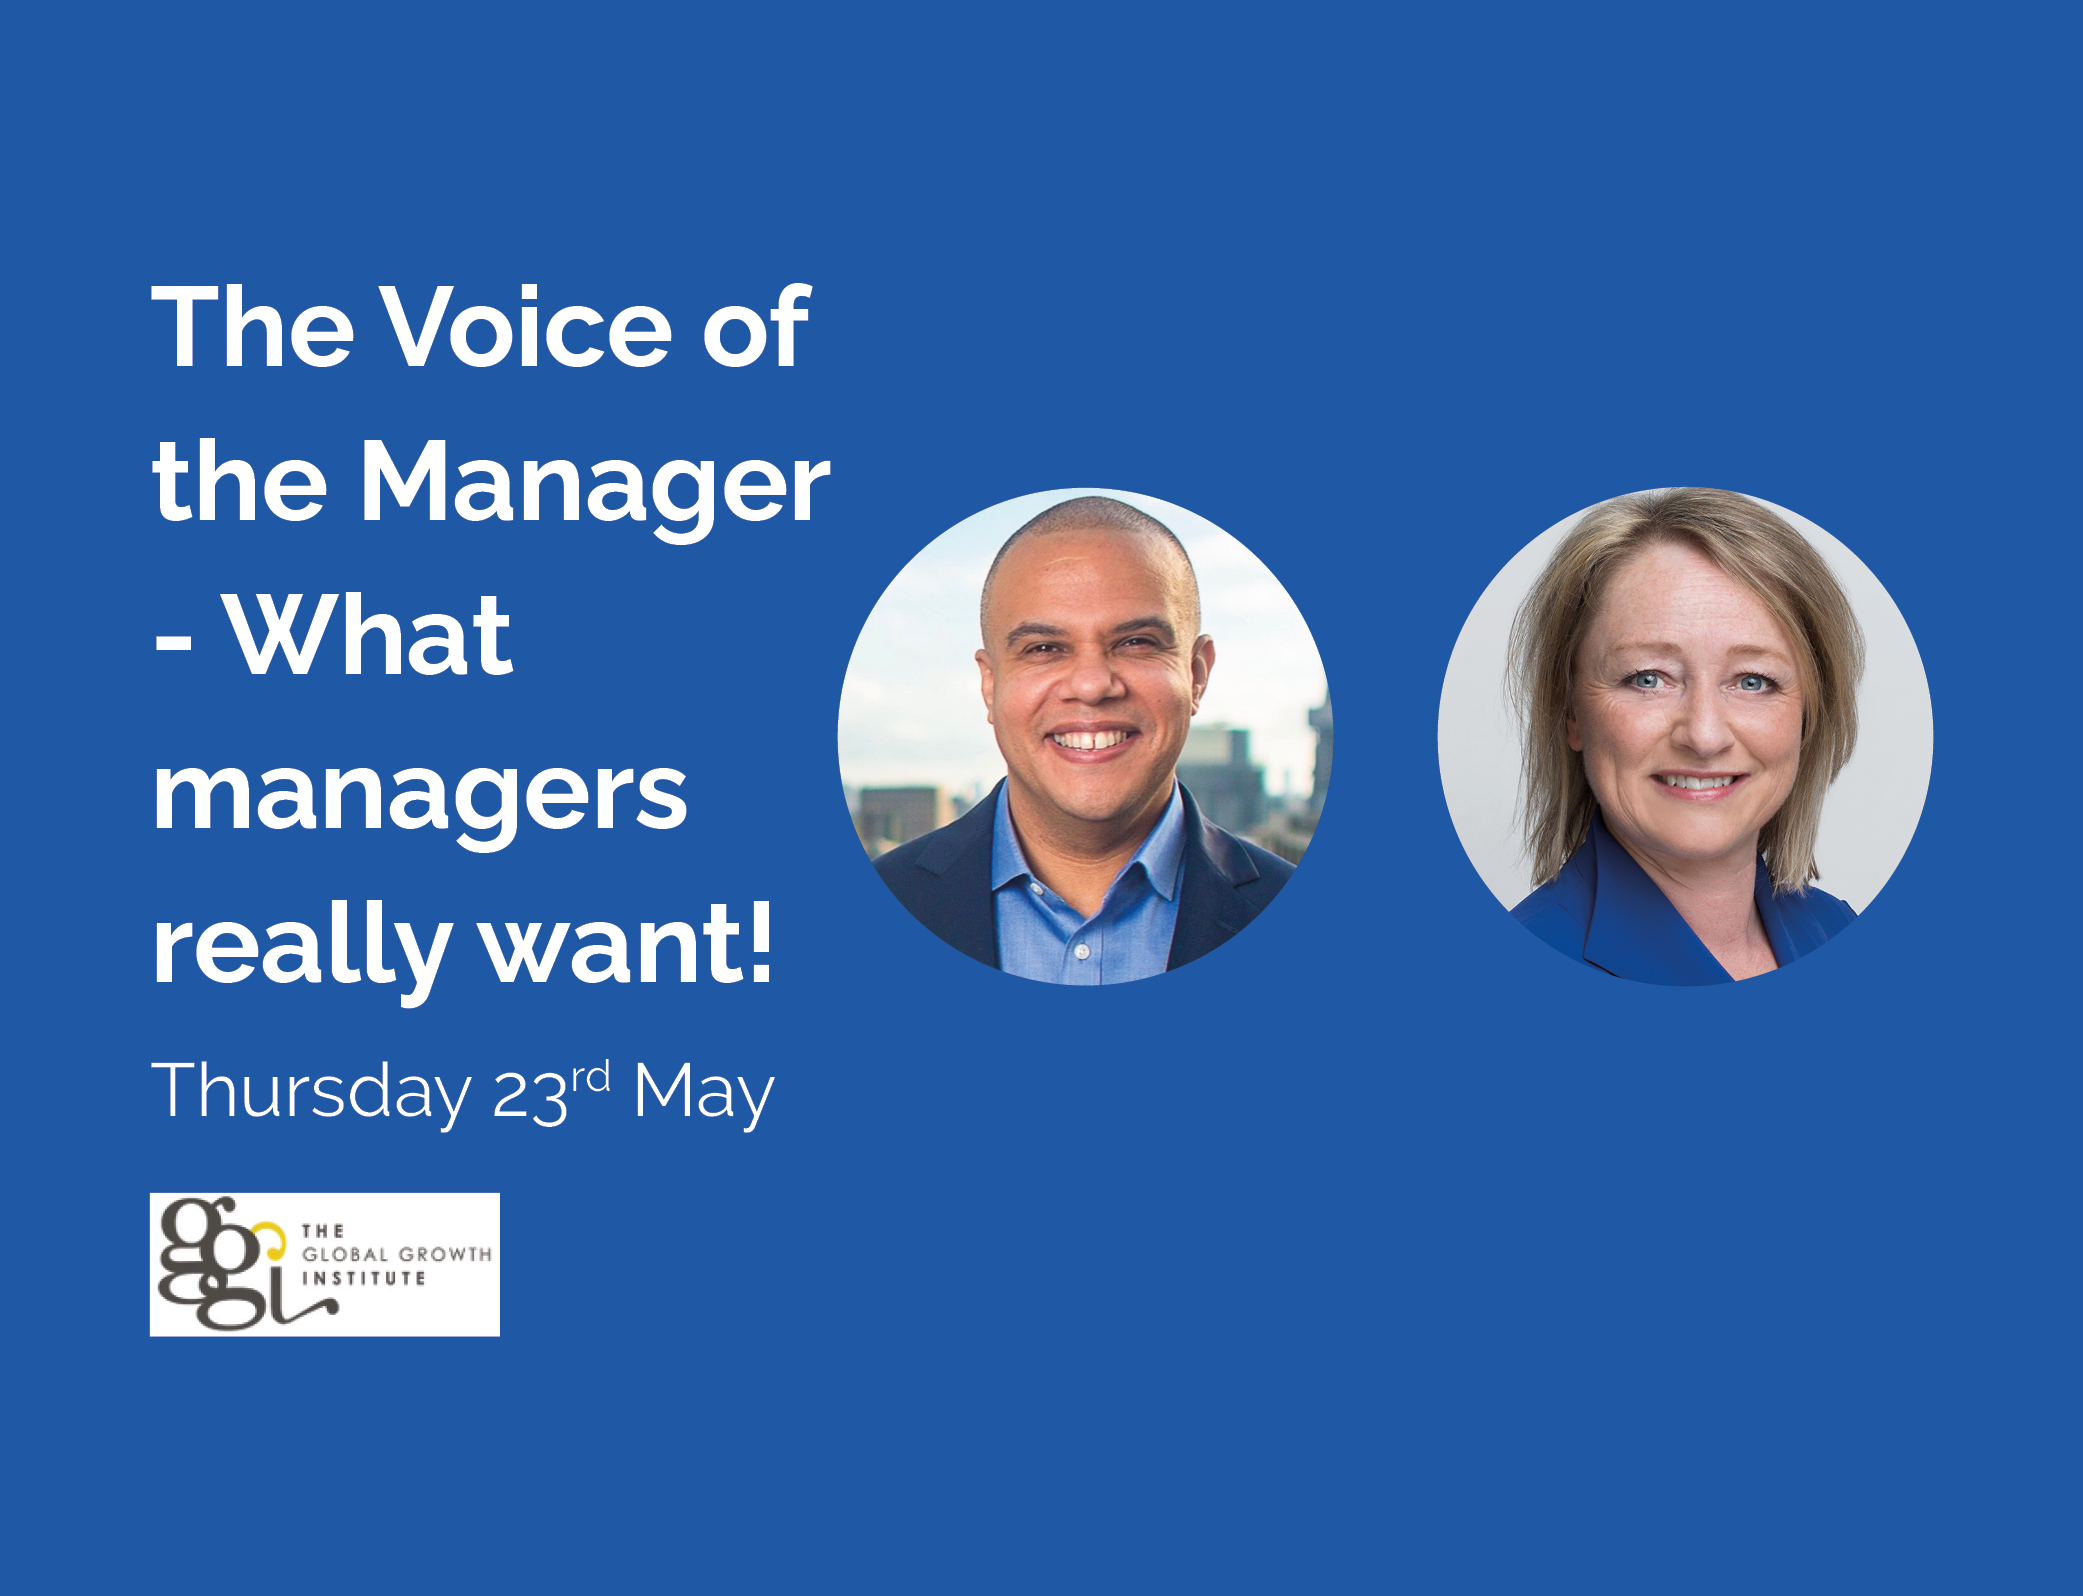 The Voice of the Manager - What managers really want!